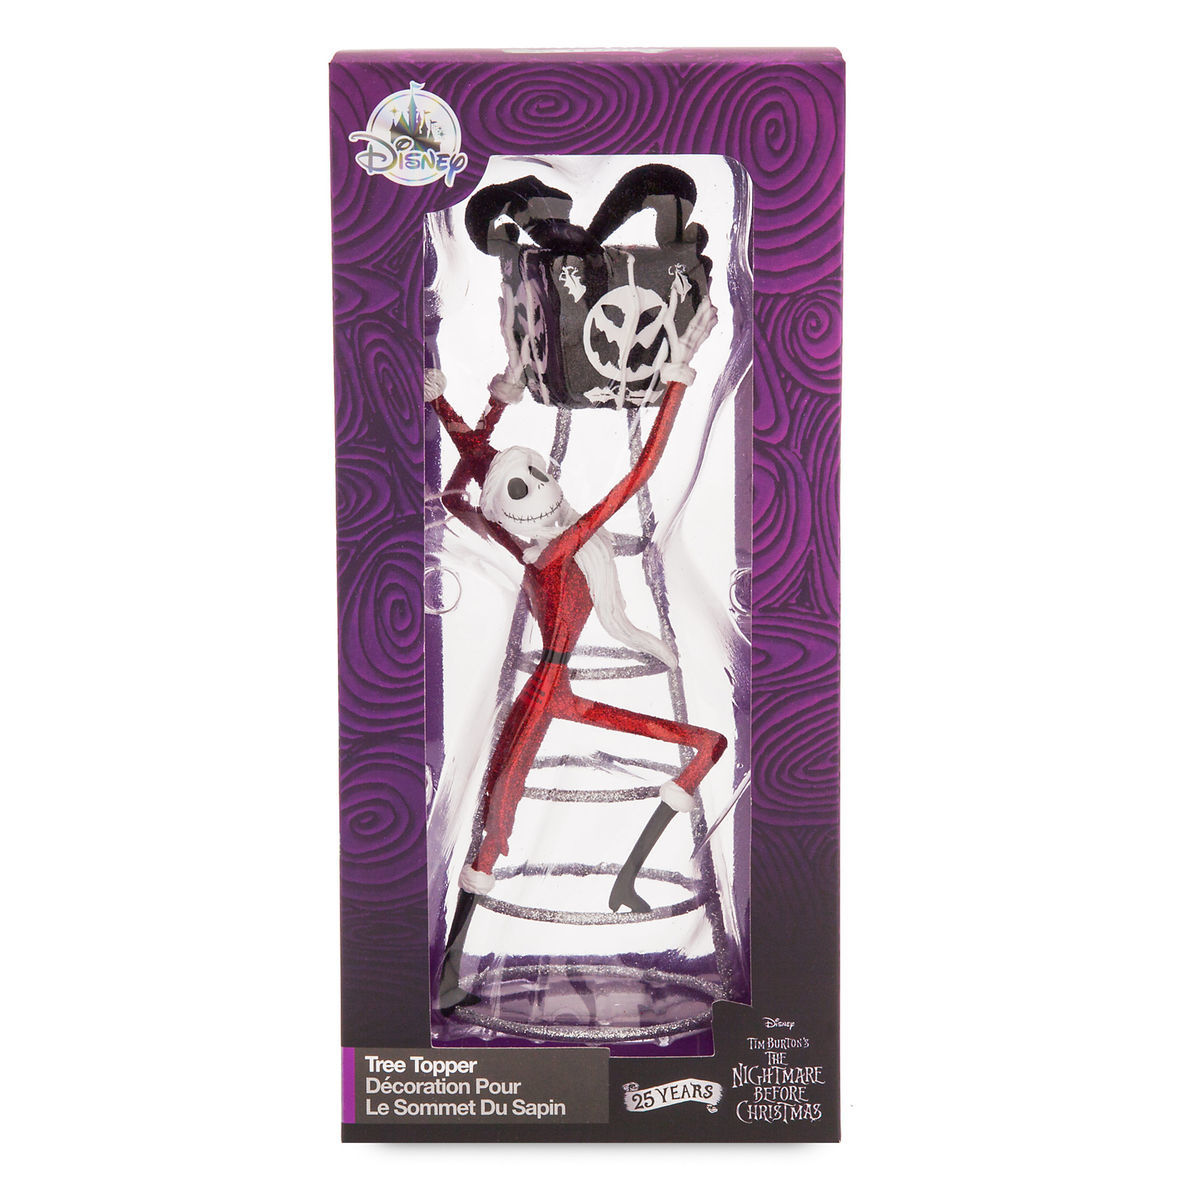 Disney Jack Skellington Tree Topper Nightmare Before Christmas New with Box